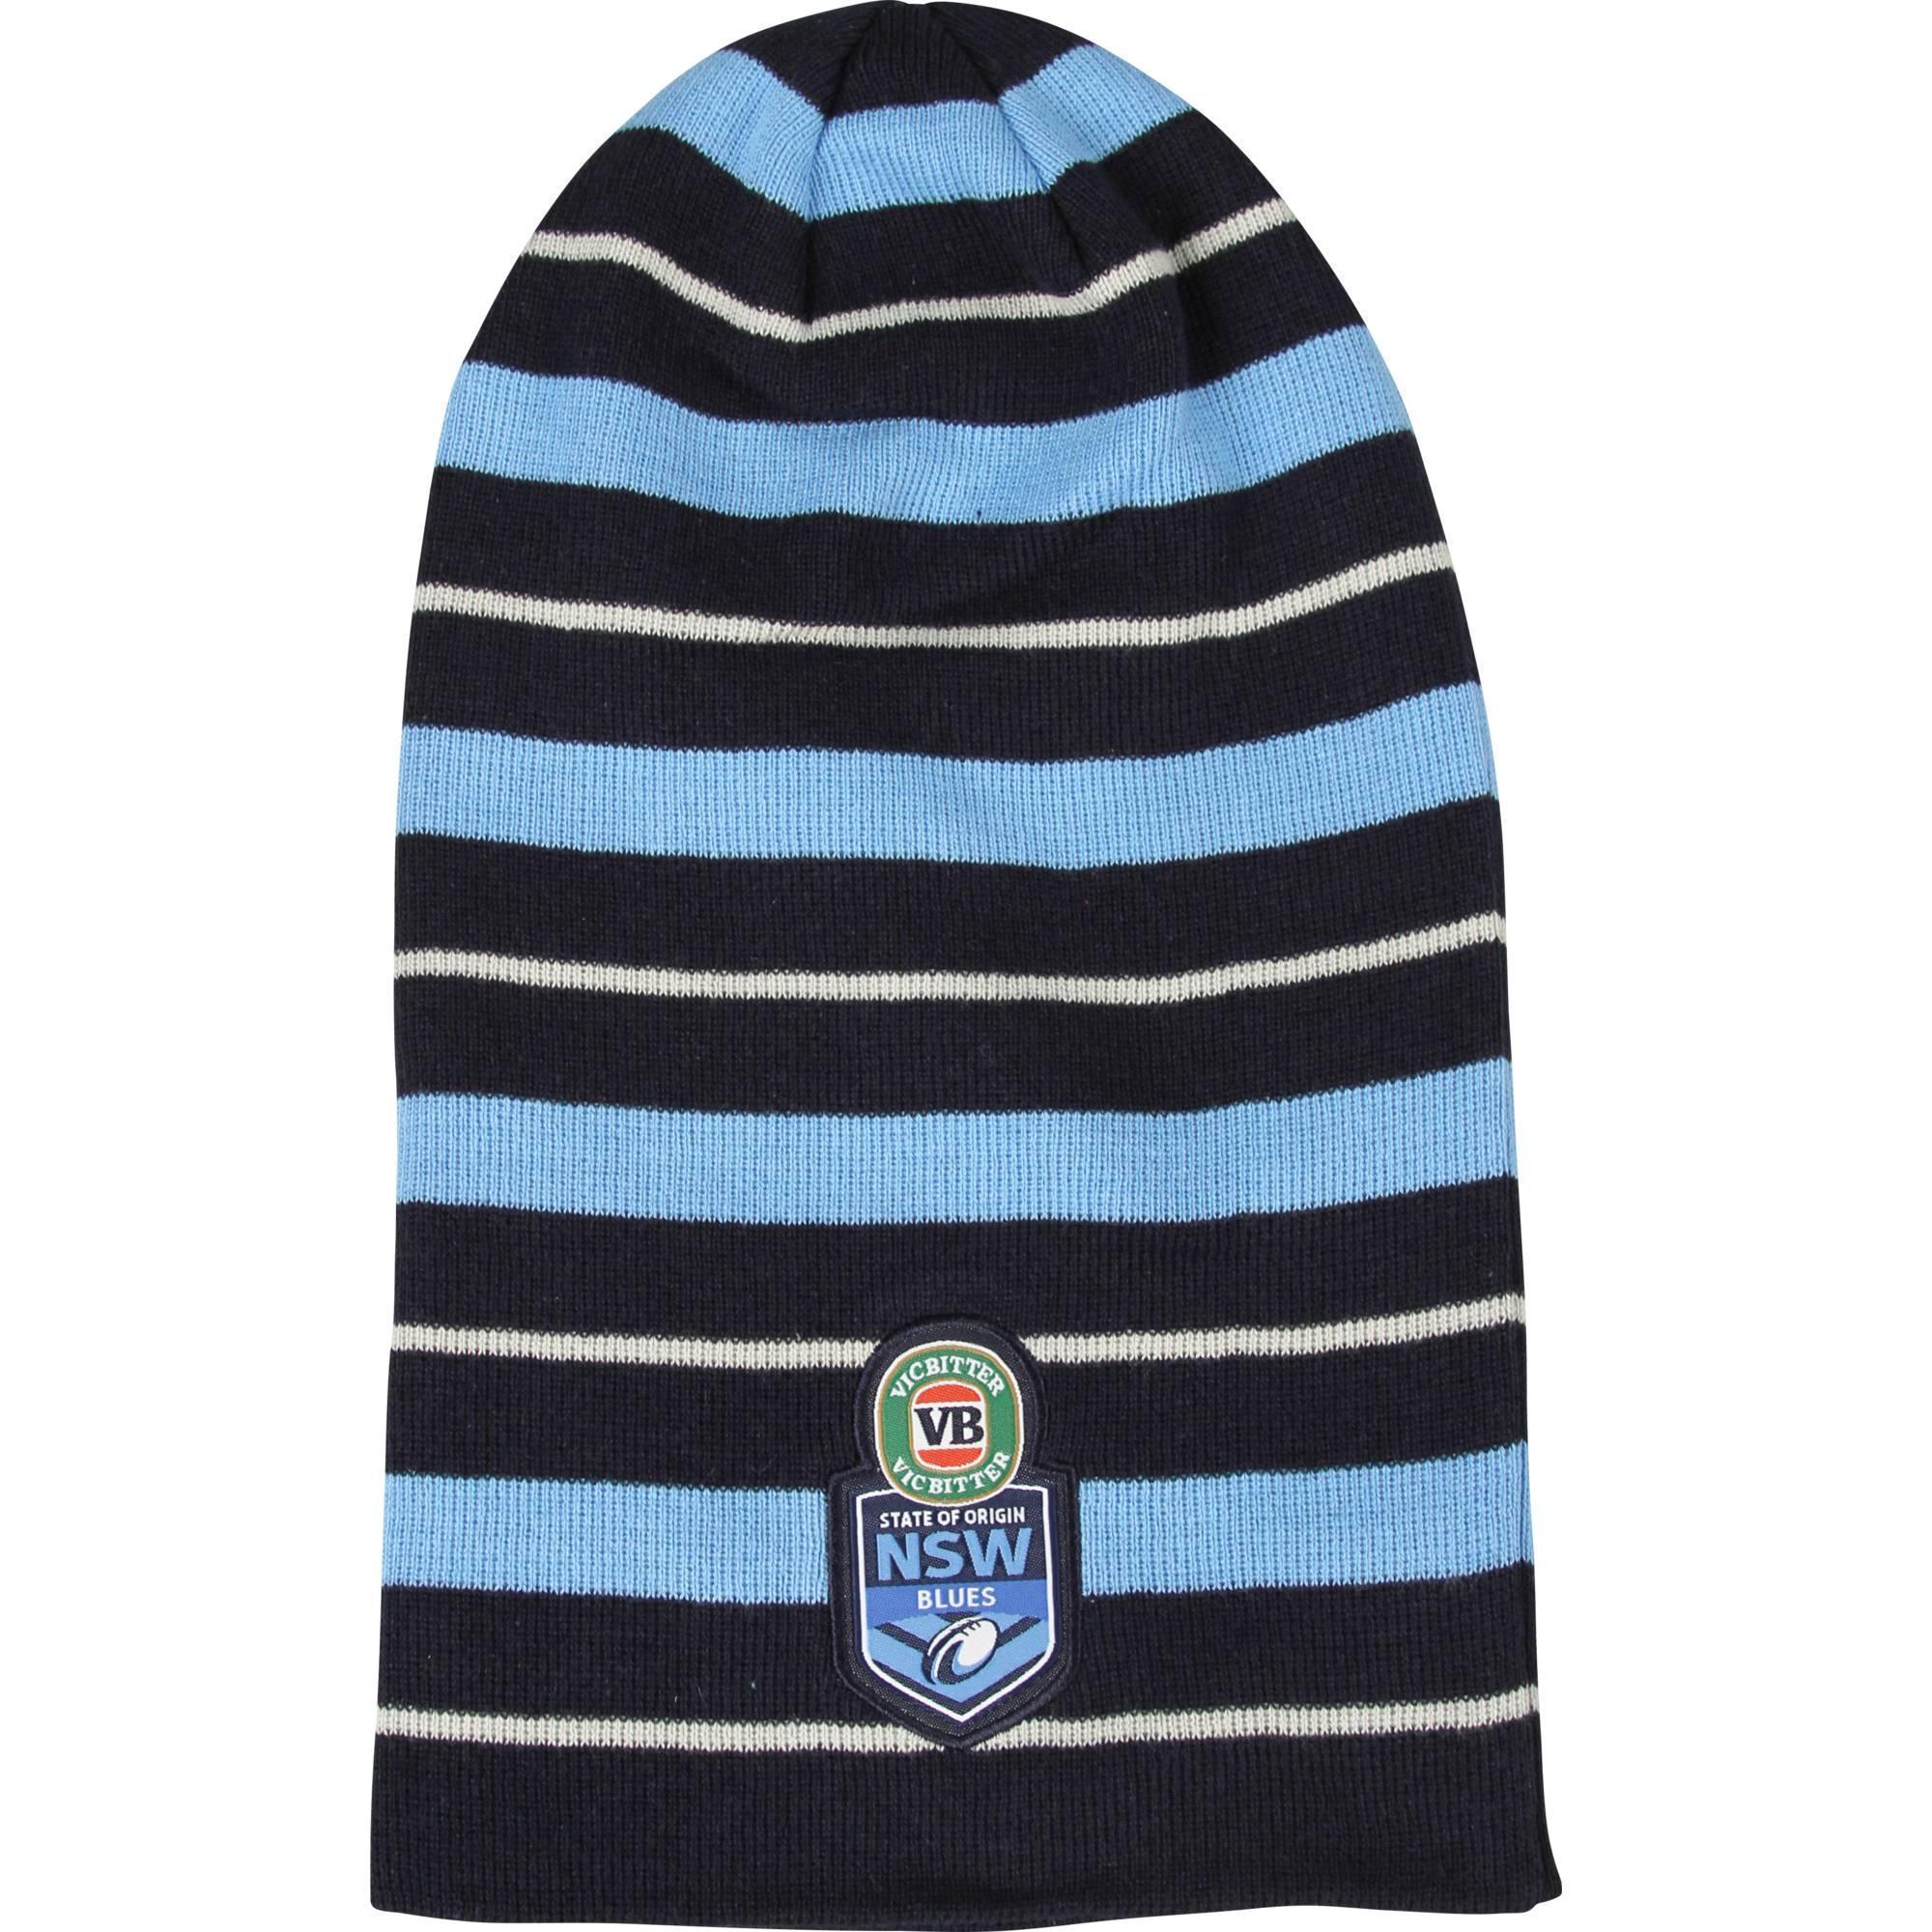 New South Wales NSW State of Origin Blues NRL SOO Long Beanie Hat